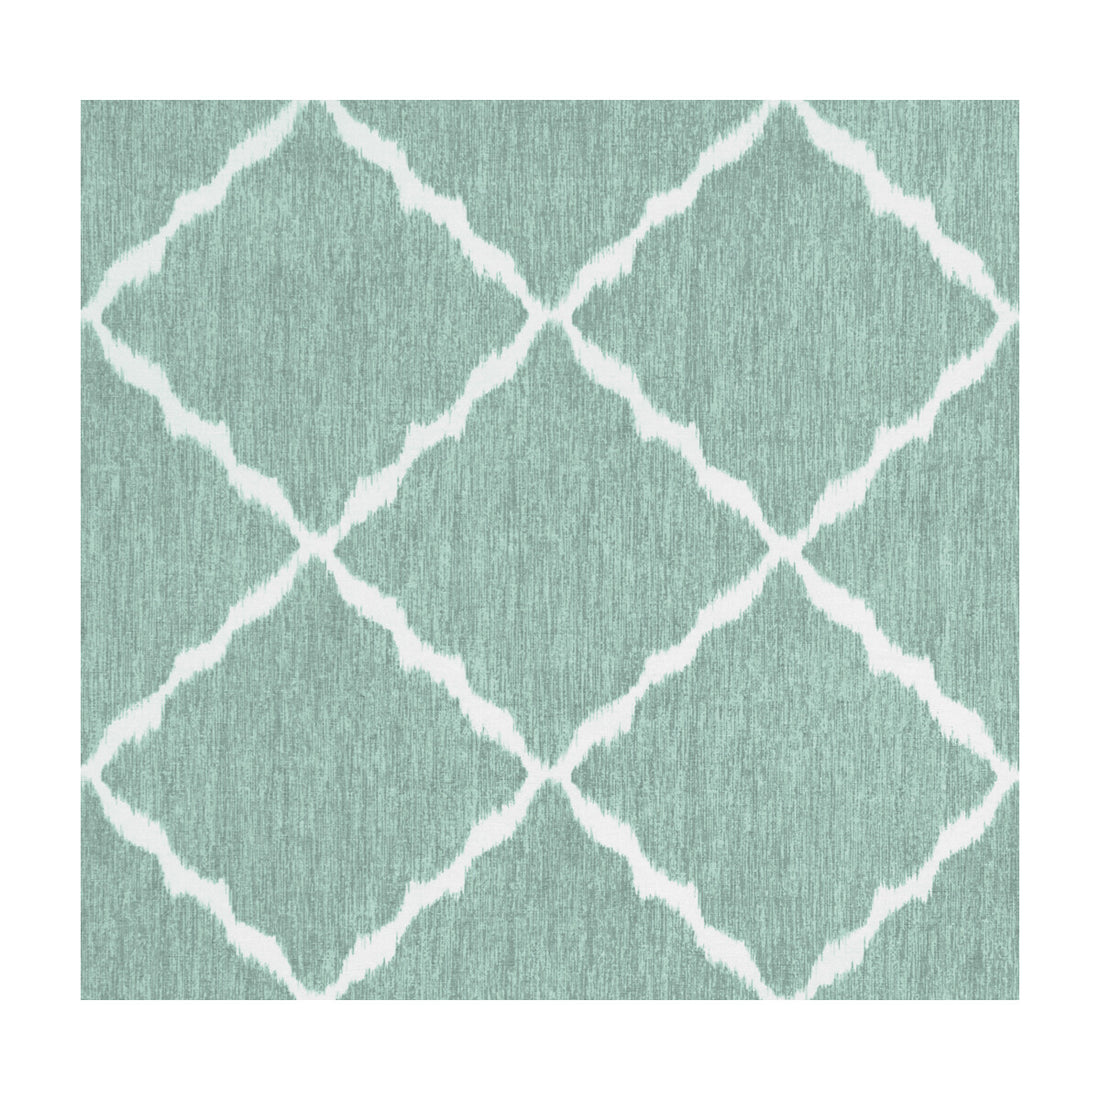 Ikat Strie fabric in spa color - pattern IKATSTRIE.15.0 - by Kravet Basics in the Sarah Richardson Harmony collection